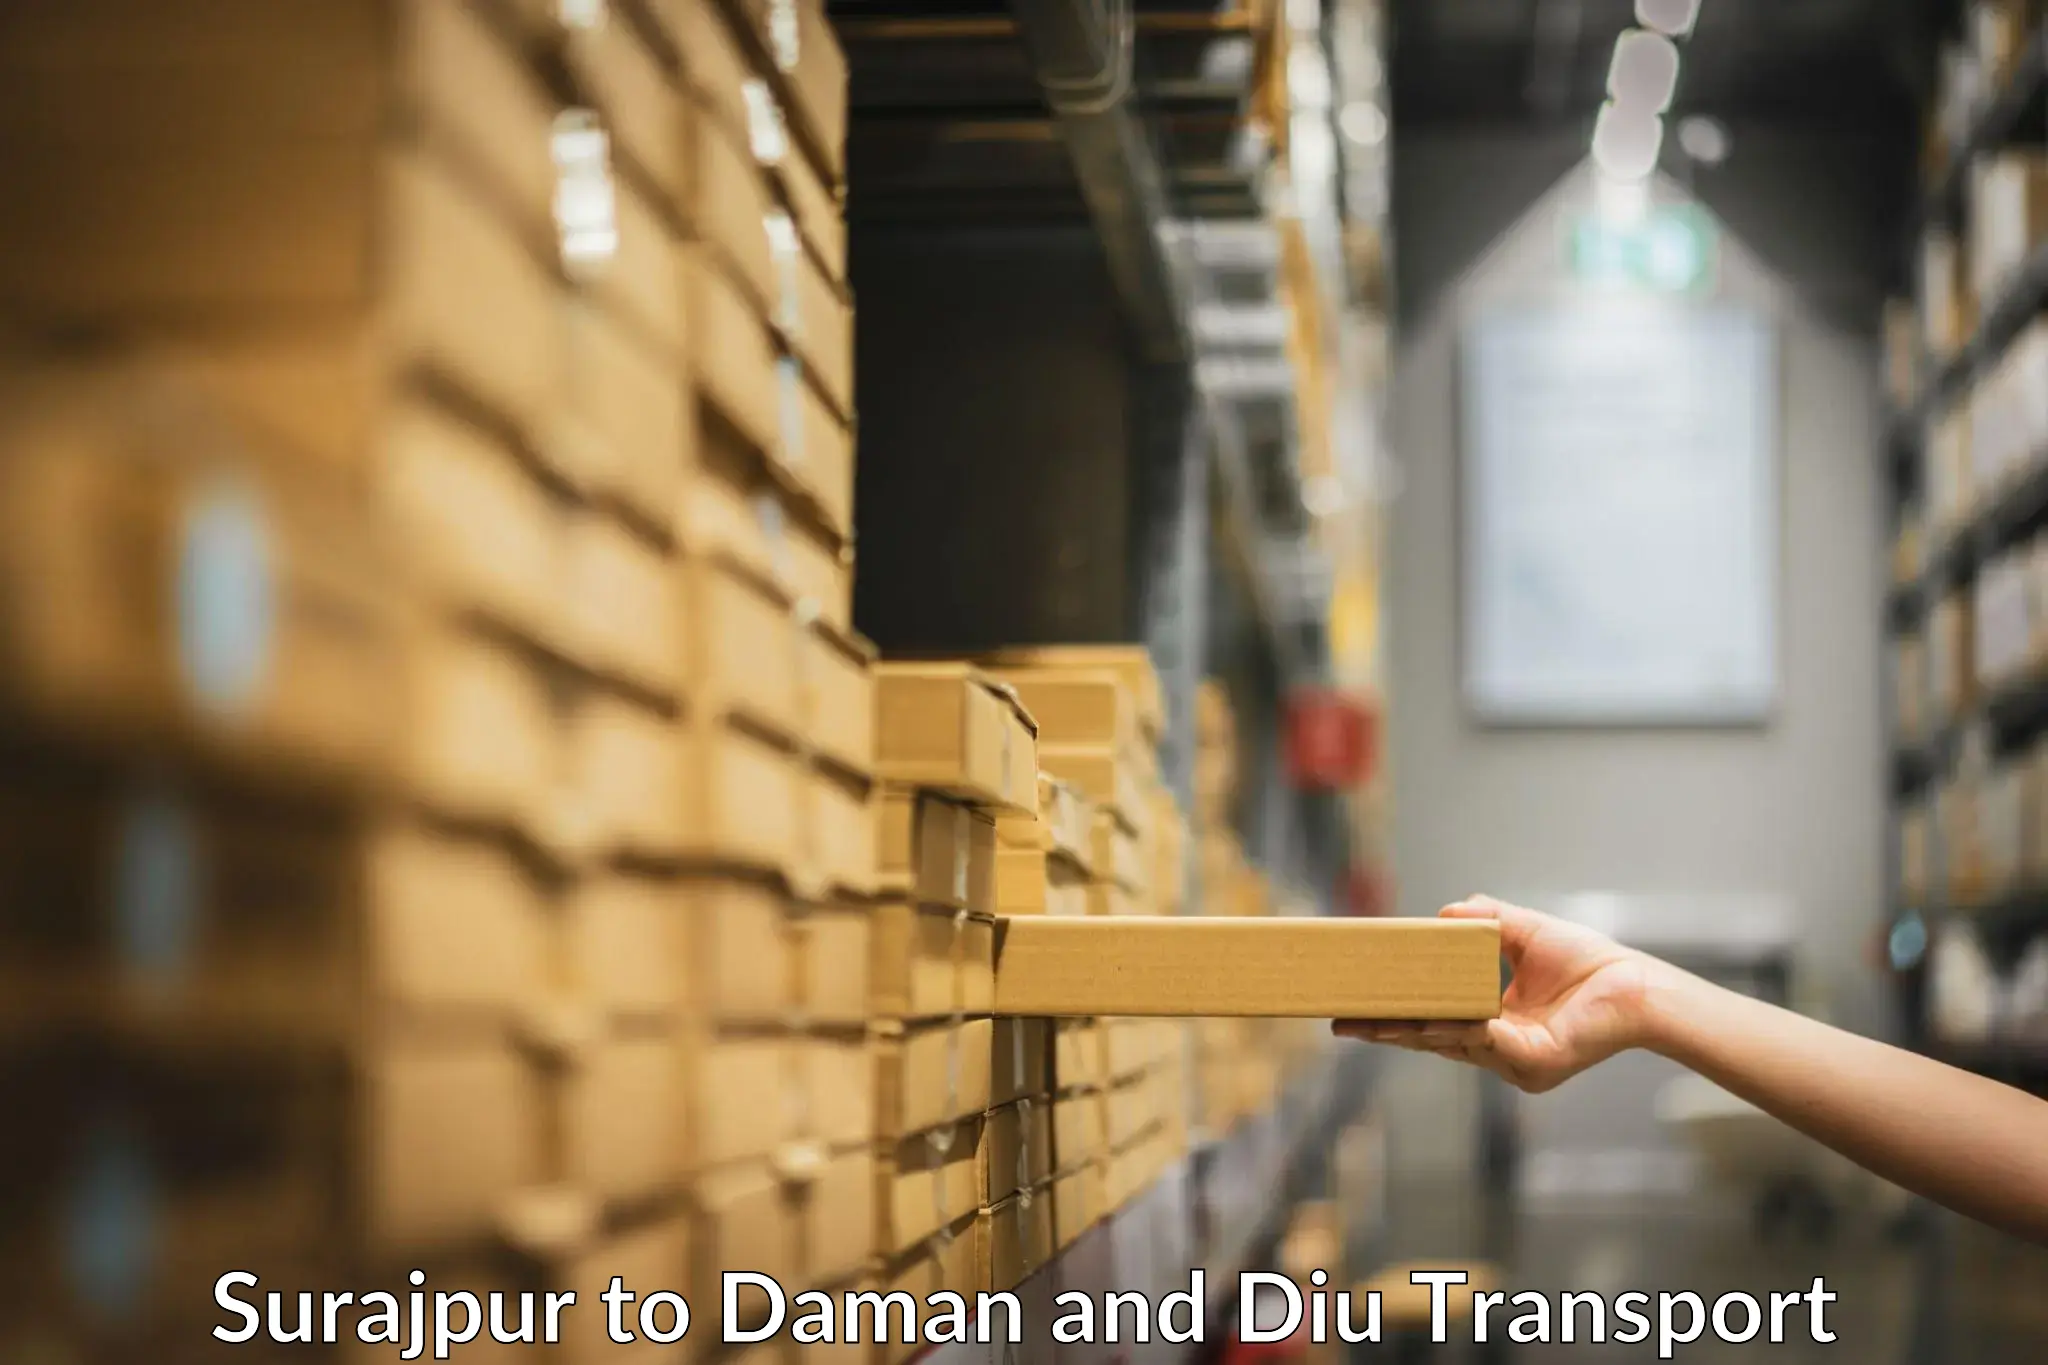 Commercial transport service Surajpur to Daman and Diu